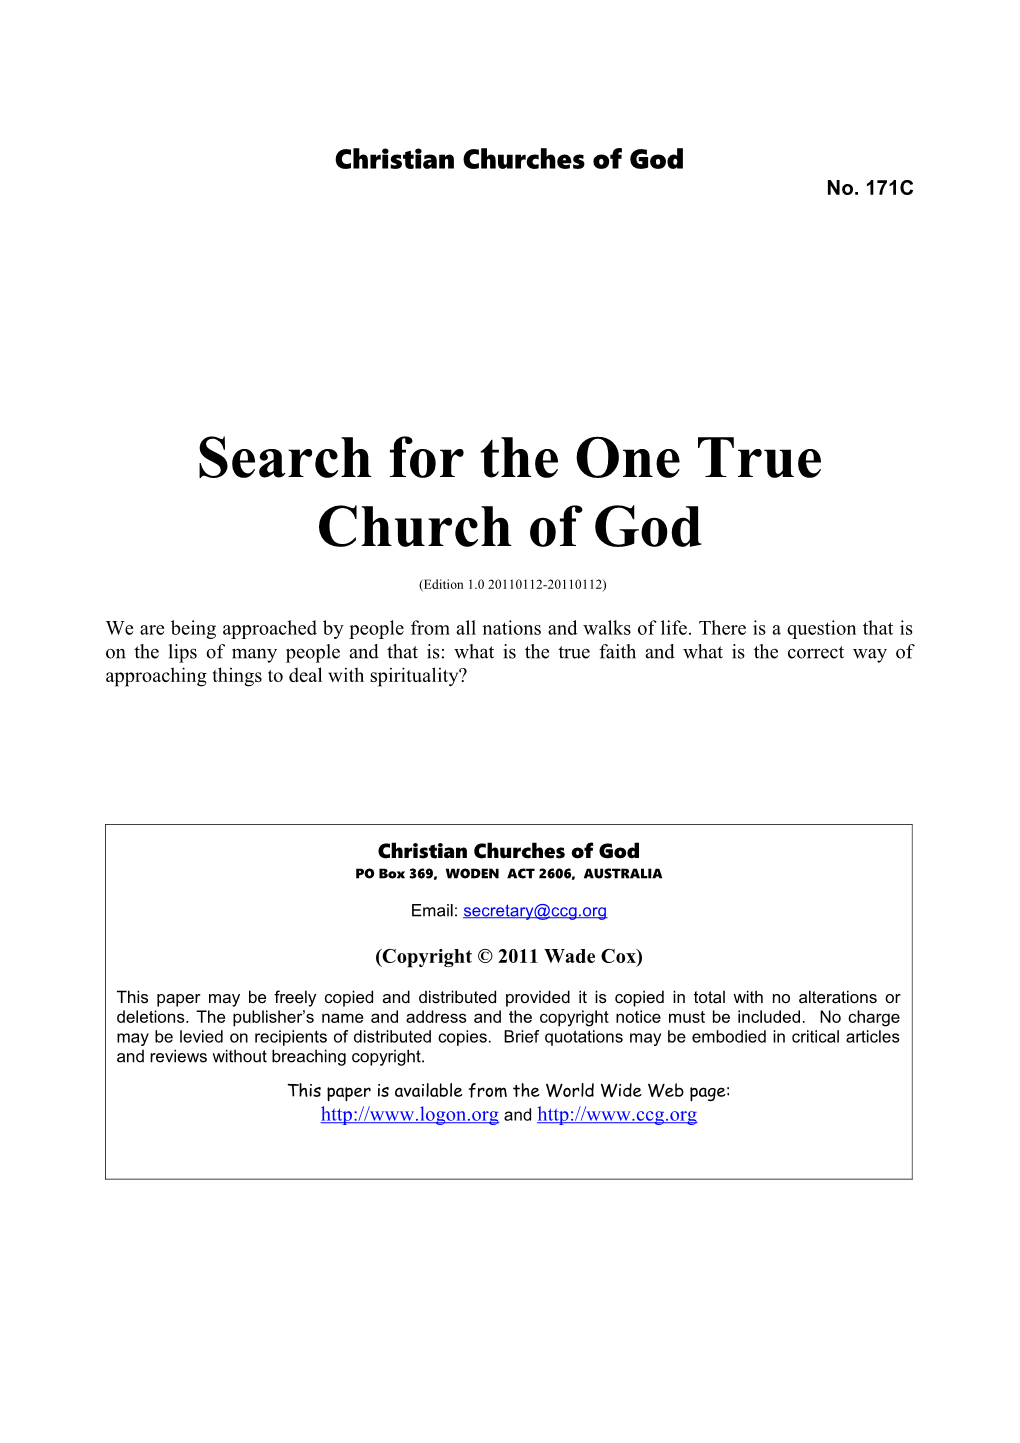 Search for the One True Church of God (No. 171C)